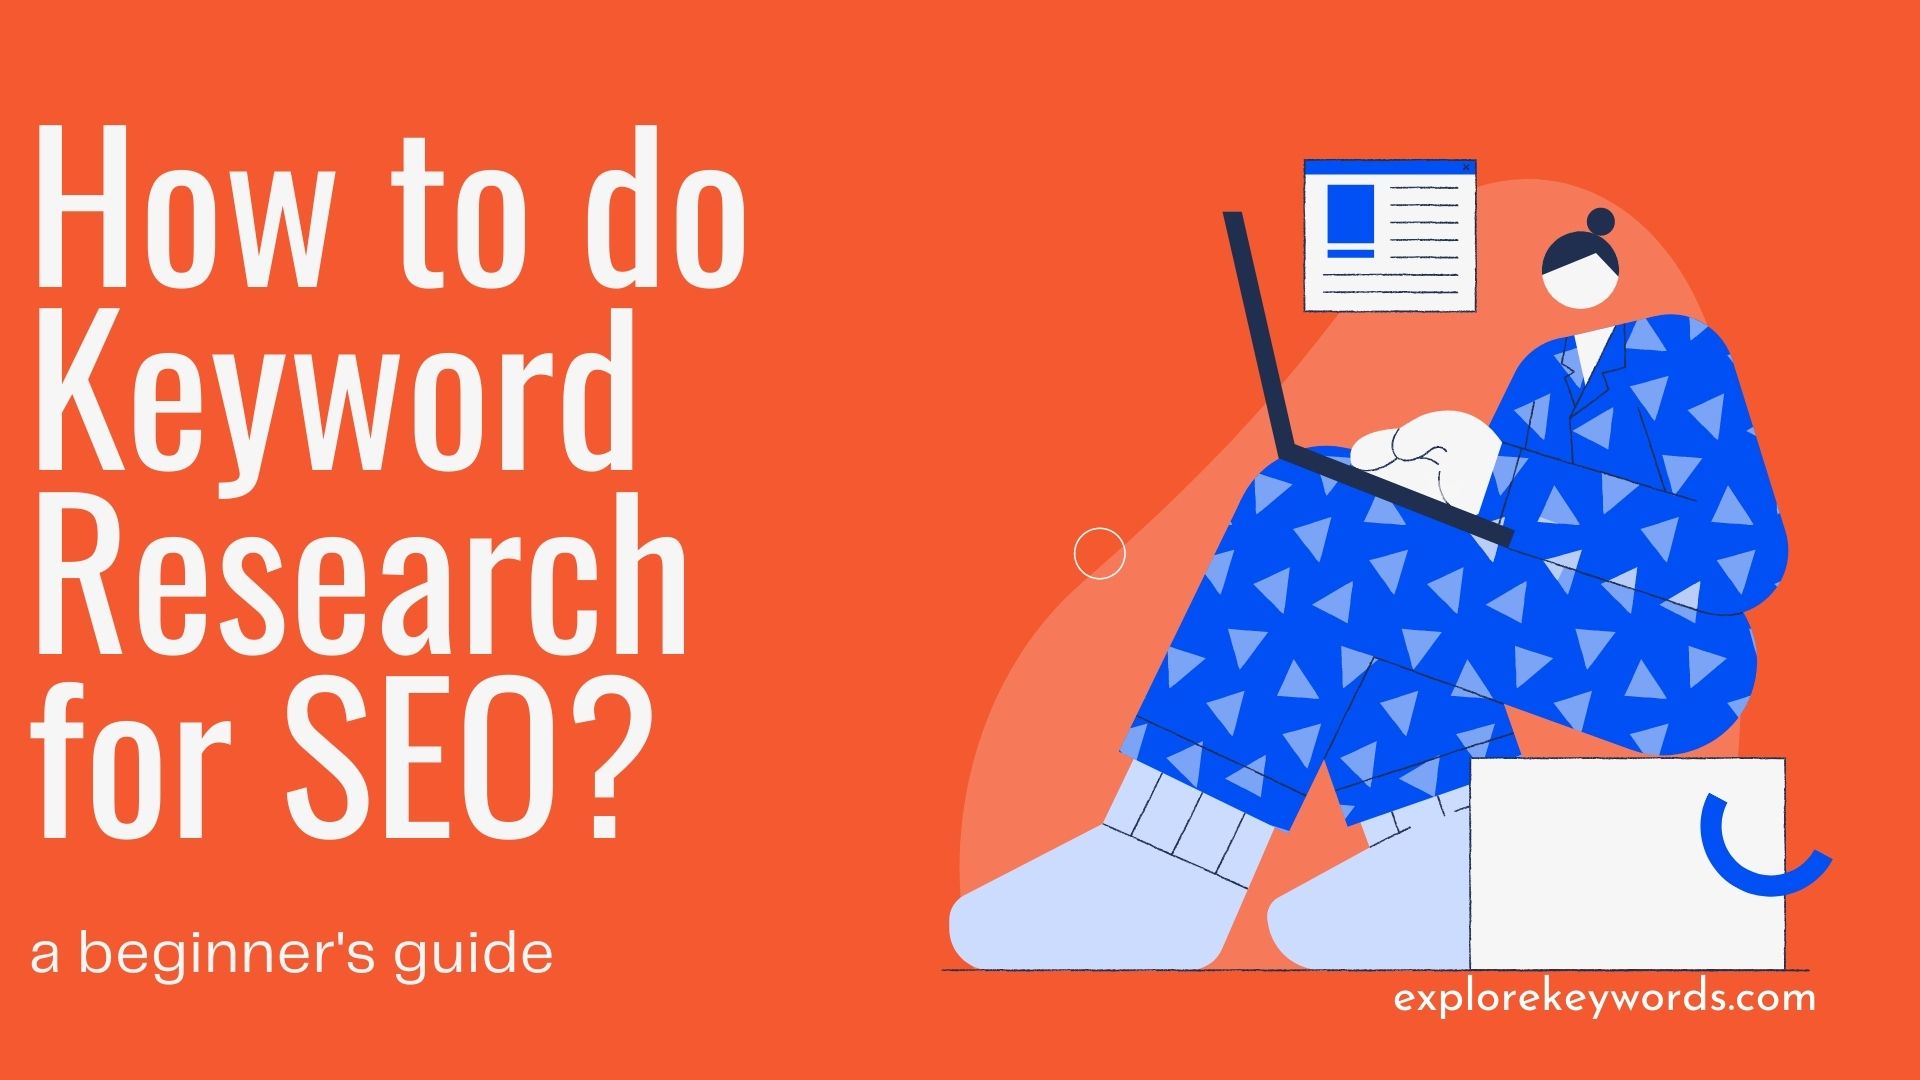 How to Do Keyword Research for SEO Using Free Tools – A beginner’s guide